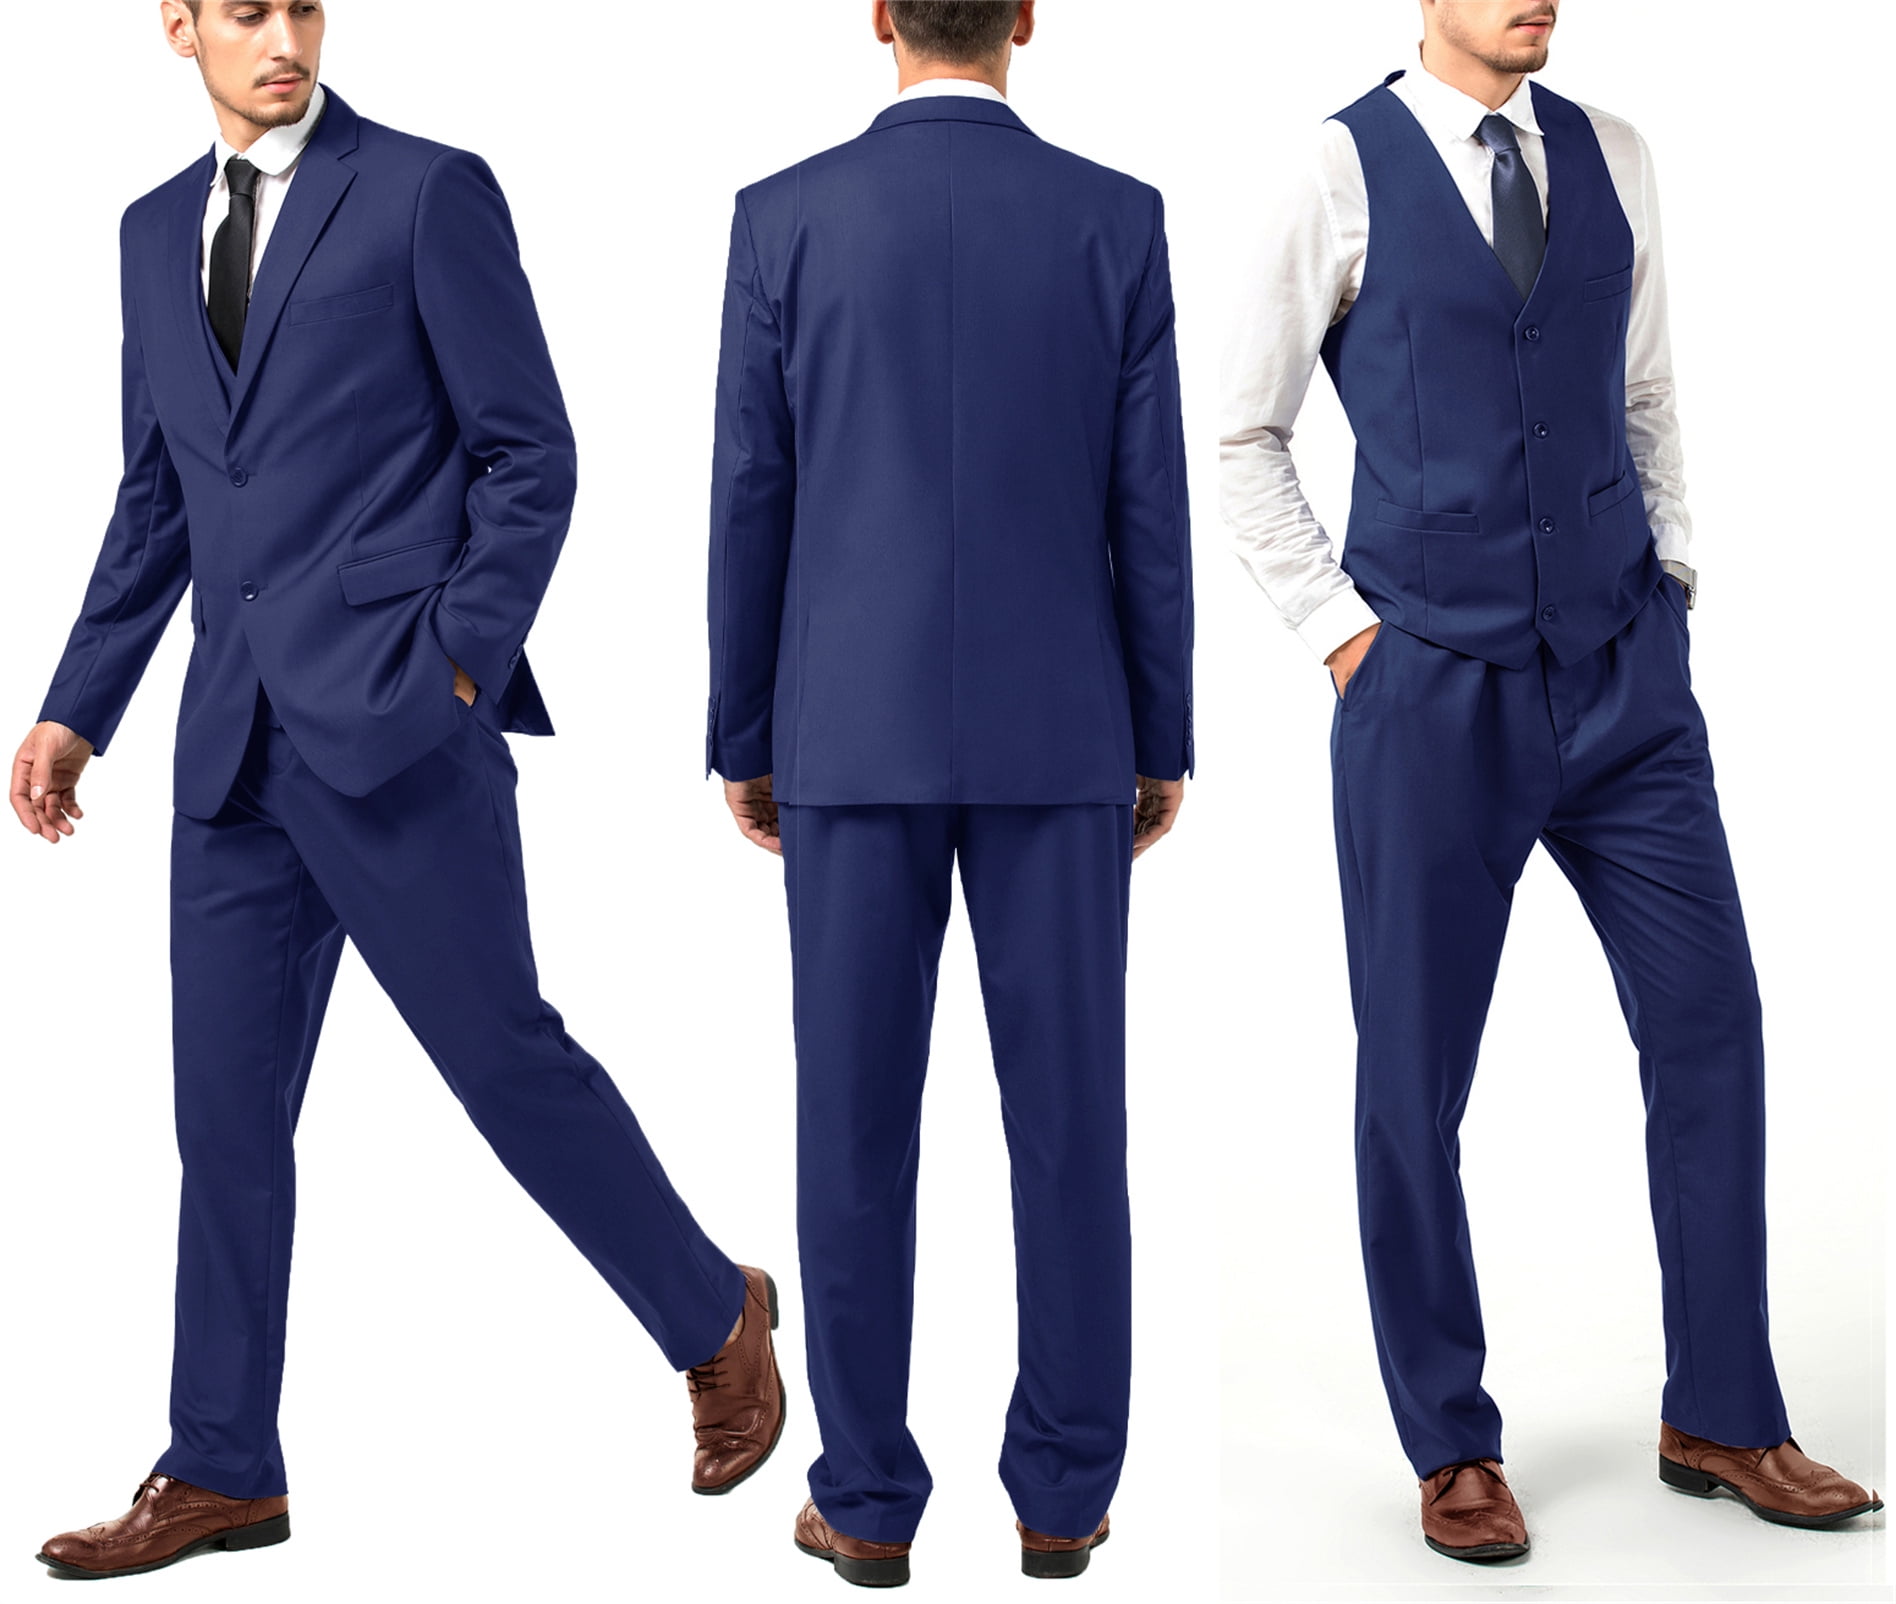 How often should you dry clean a suit?